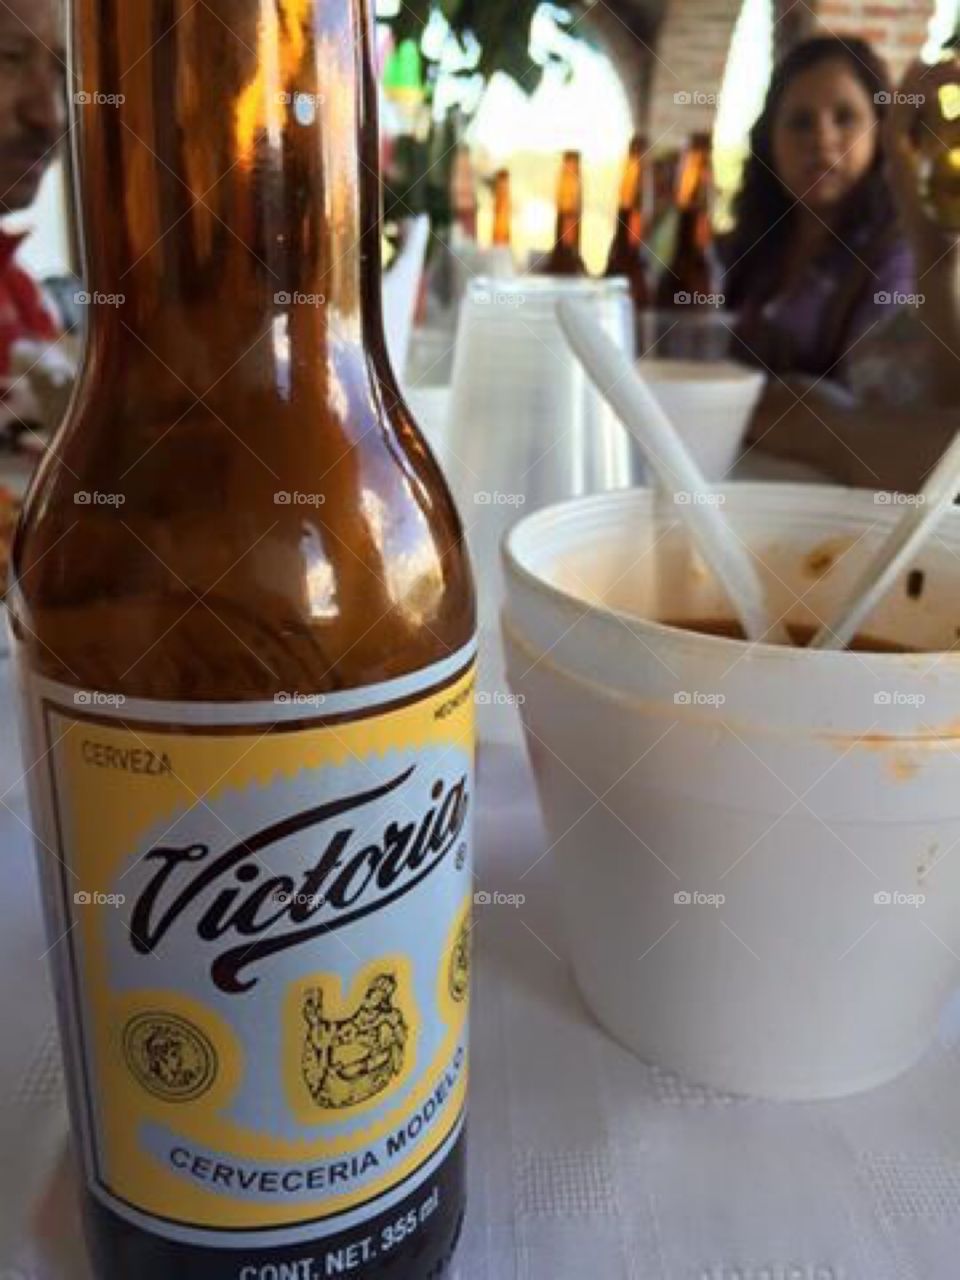 Victoria beer at a party in Mexico 